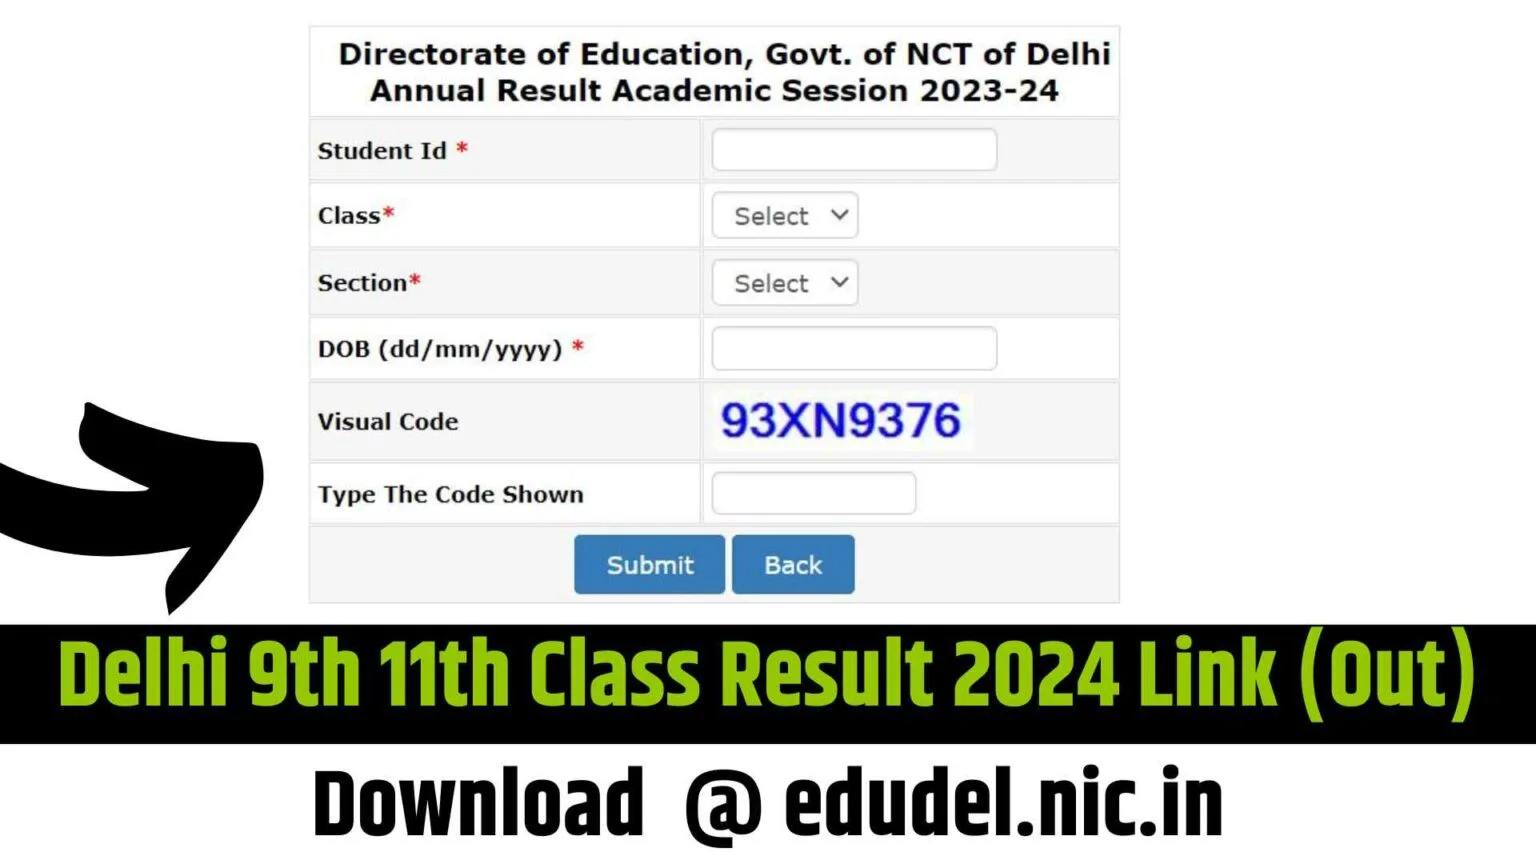 Delhi 9th 11th Class Result 2024 Link (Out) Download Marksheet @ edudel.nic.in